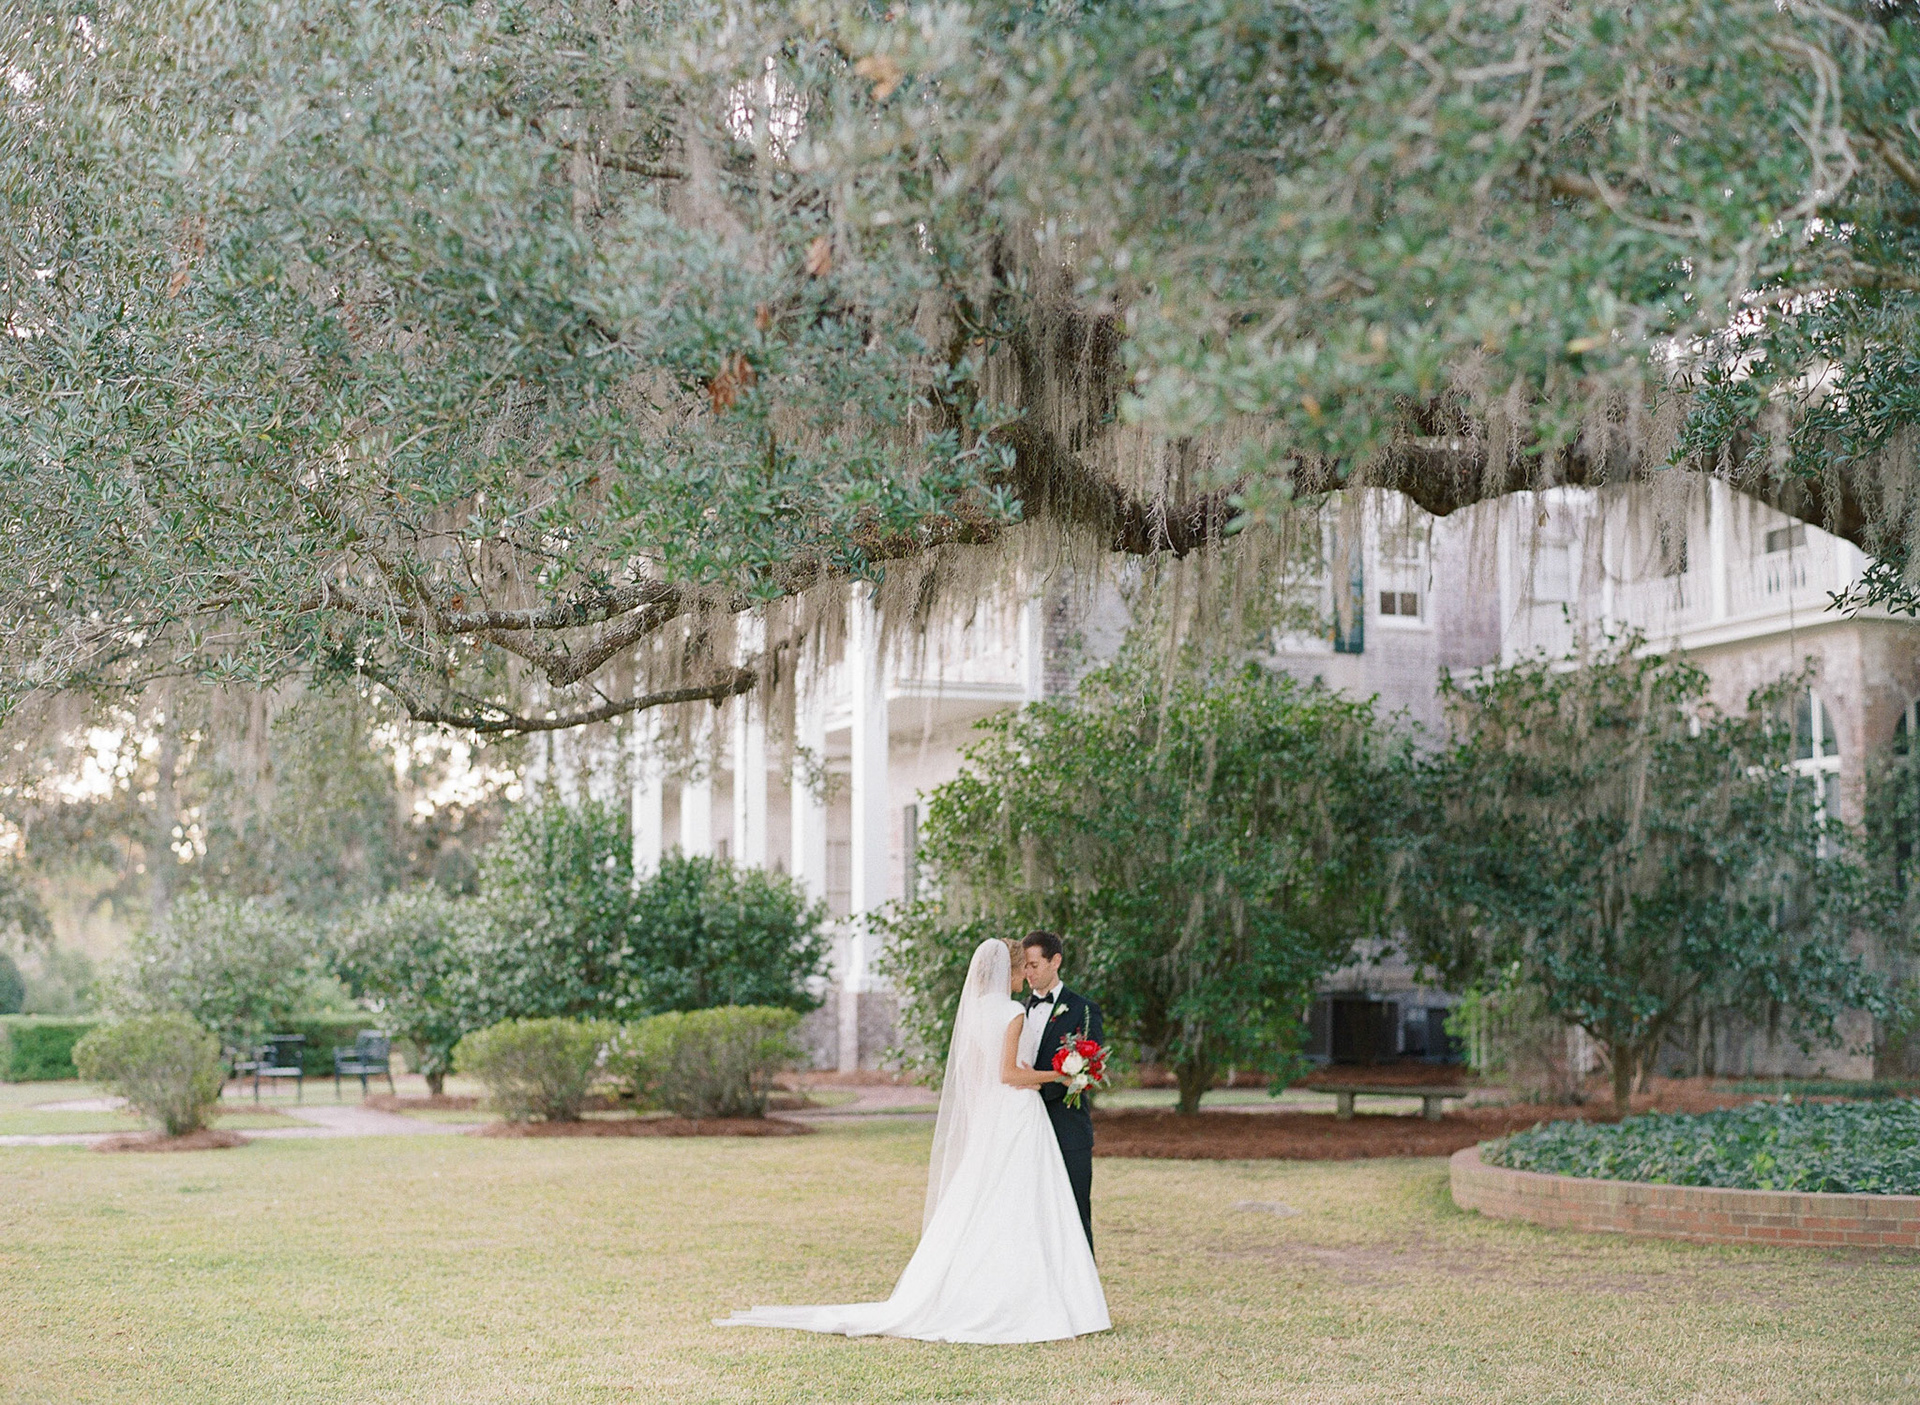 Kaitlynne Grice - Classic Southern Wedding, 2016